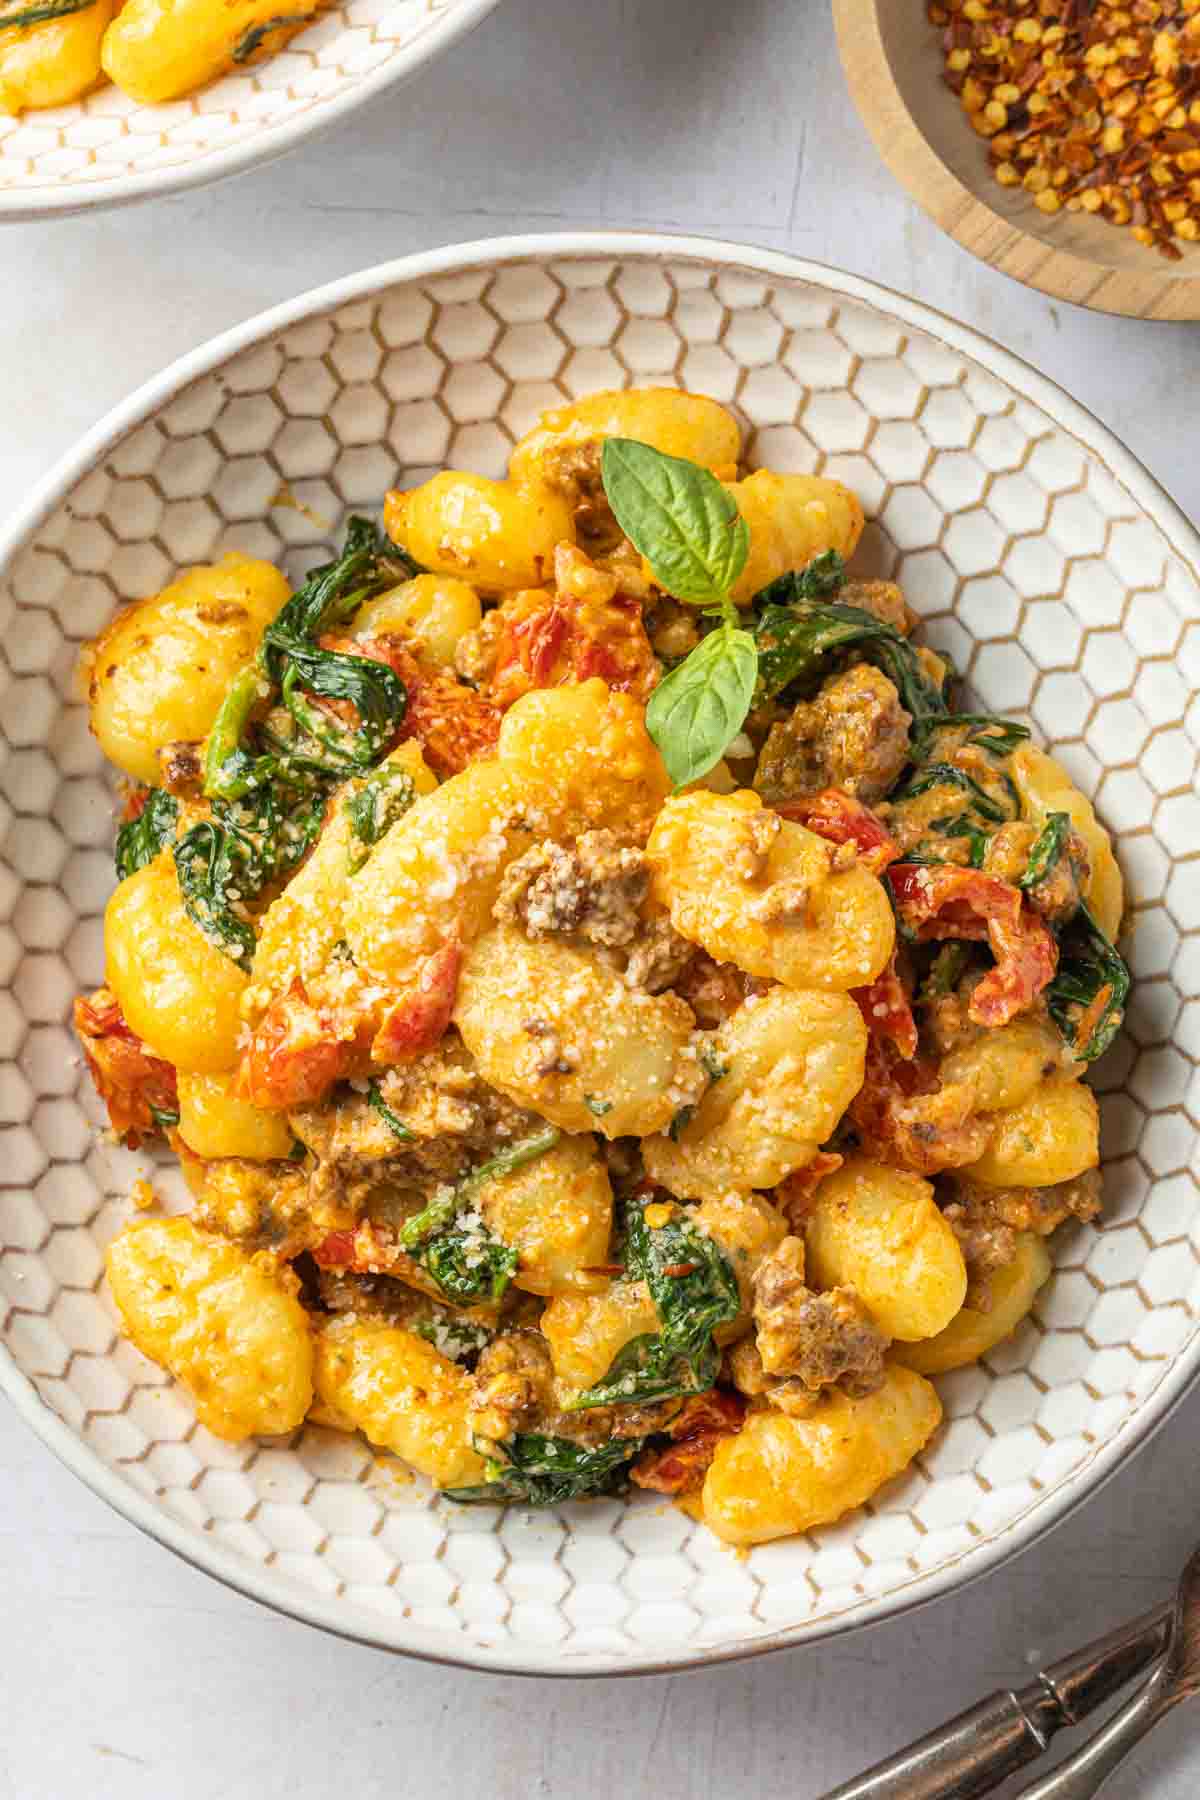 A bowl of gnocchi and chorizo sausage with spinach and sundried tomatoes in a creamy sauce.  